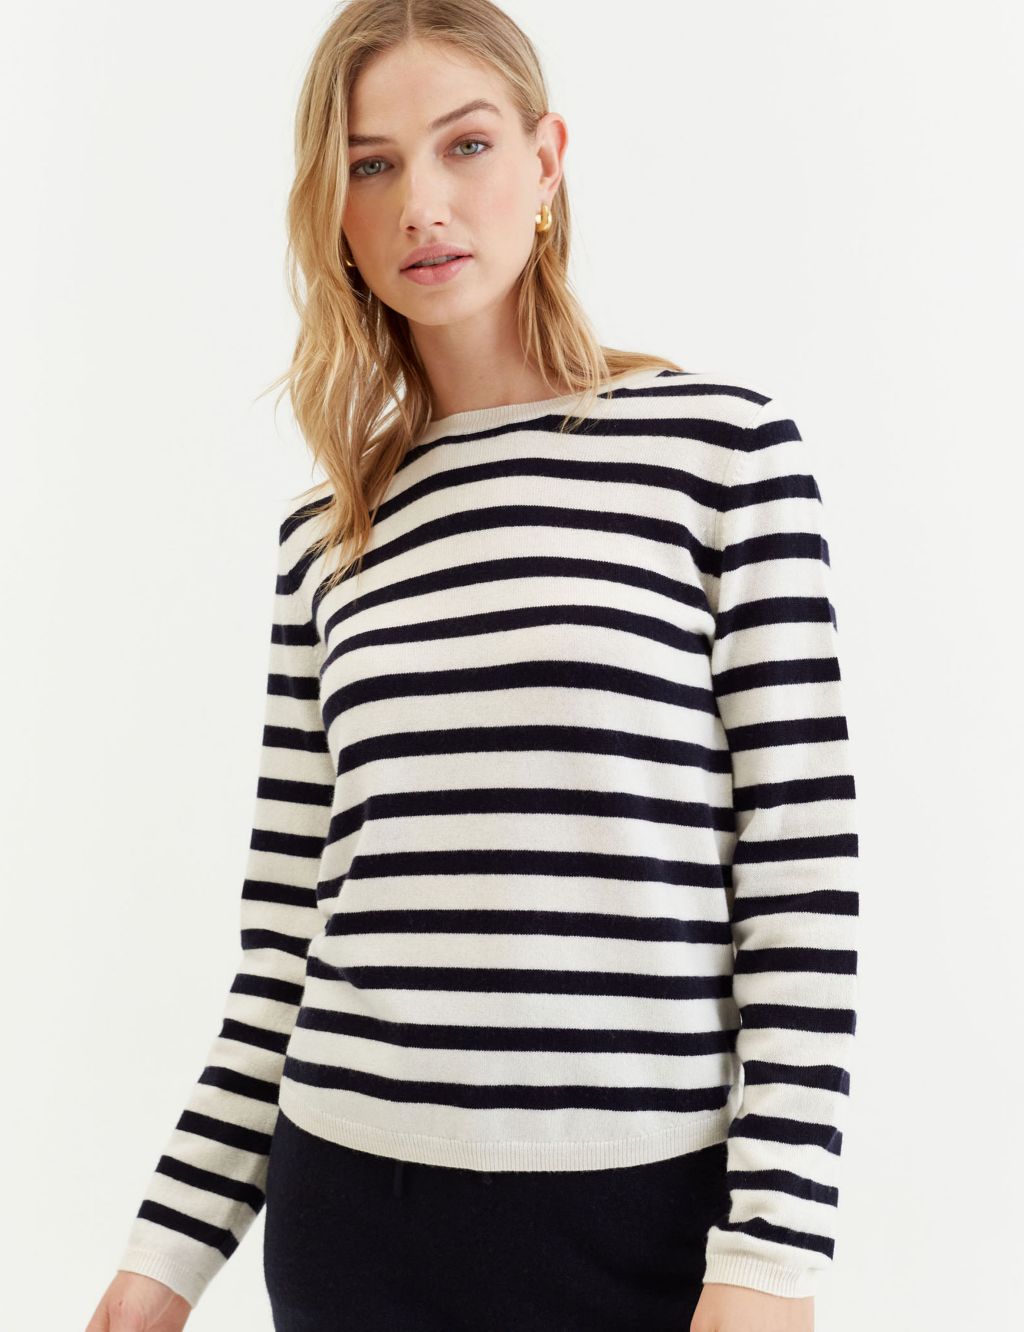 Wool Rich Striped Sweatshirt with Cashmere image 1